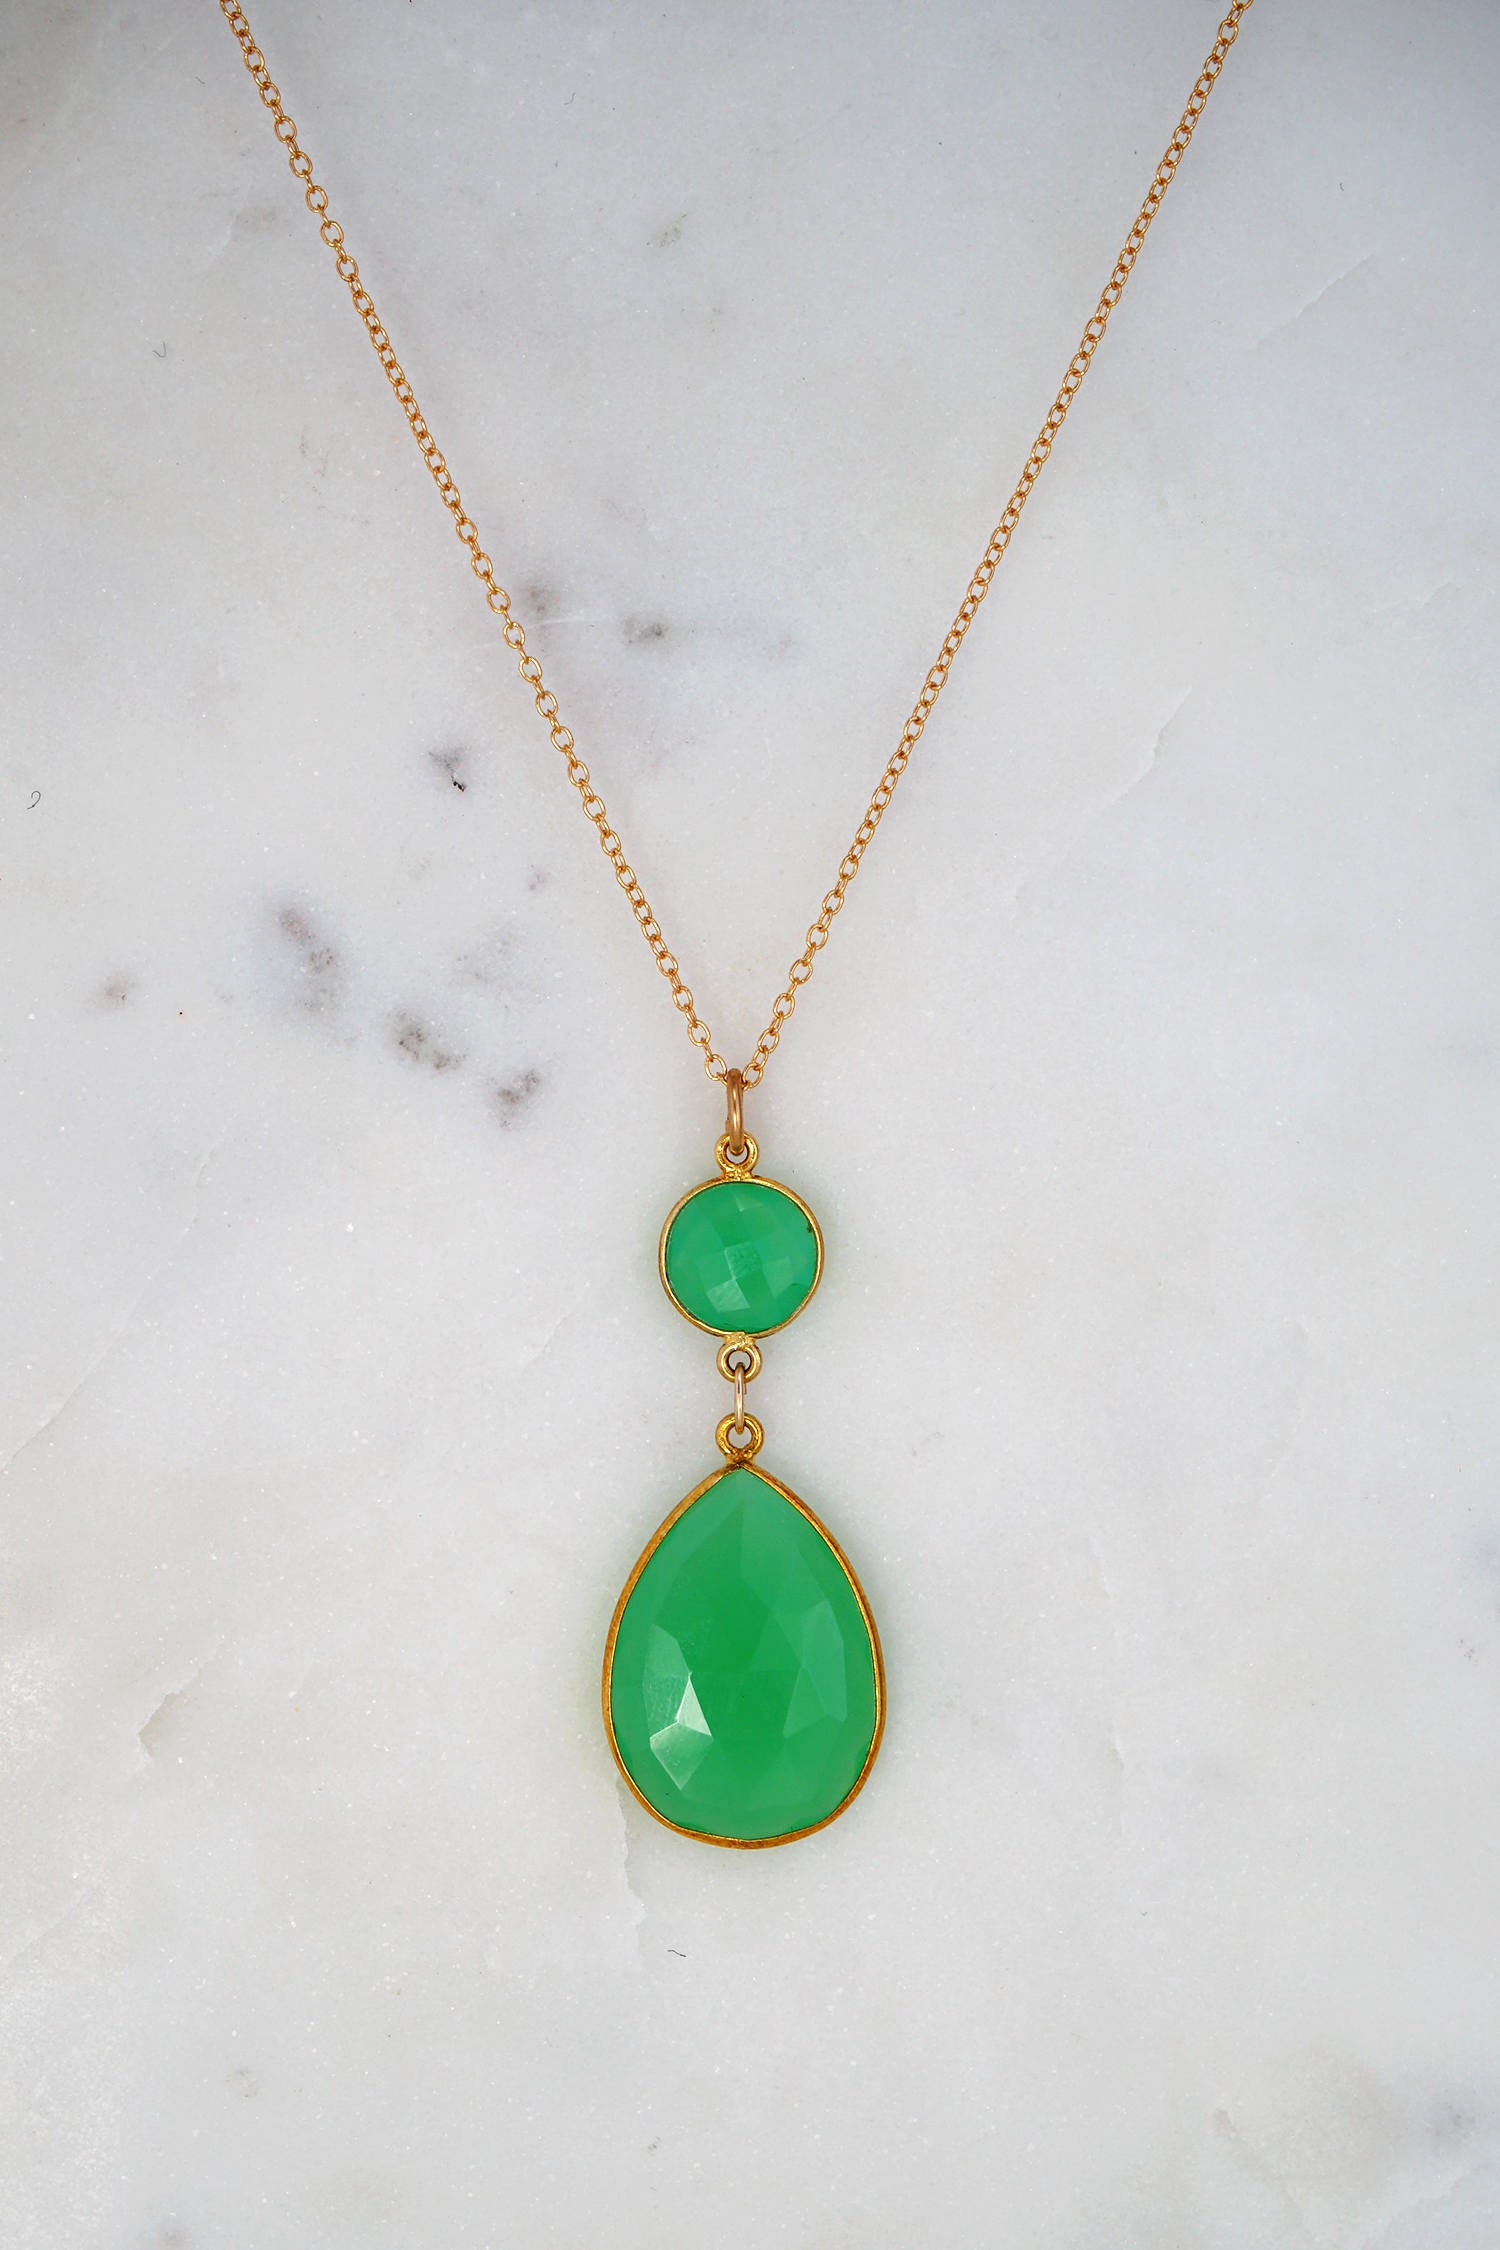 Chrysoprase Necklace, Two Tier Gemstone Necklace, Bezel set necklace, Jewelry gift for Christmas, Teardrop Pendant Necklace, Gold Necklace